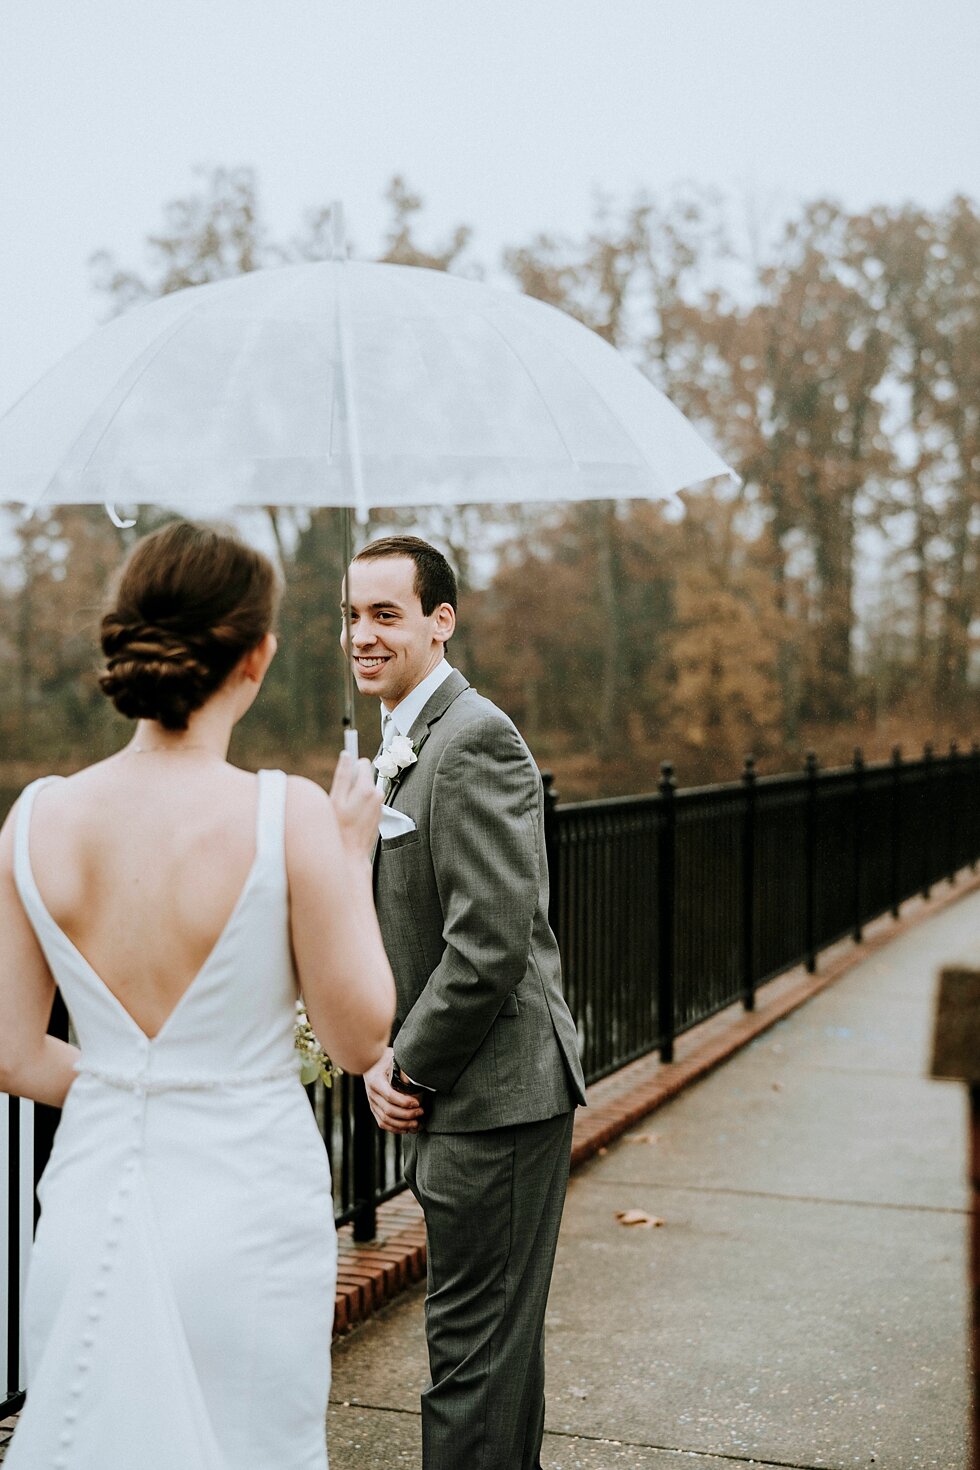  The first look turn showing the grooms face when he sees his gorgeous bride! rainy day wedding day umbrella #thatsdarling #weddingday #weddinginspiration #weddingphoto #love #justmarried #midwestphotographer #kywedding #louisville #kentuckywedding #